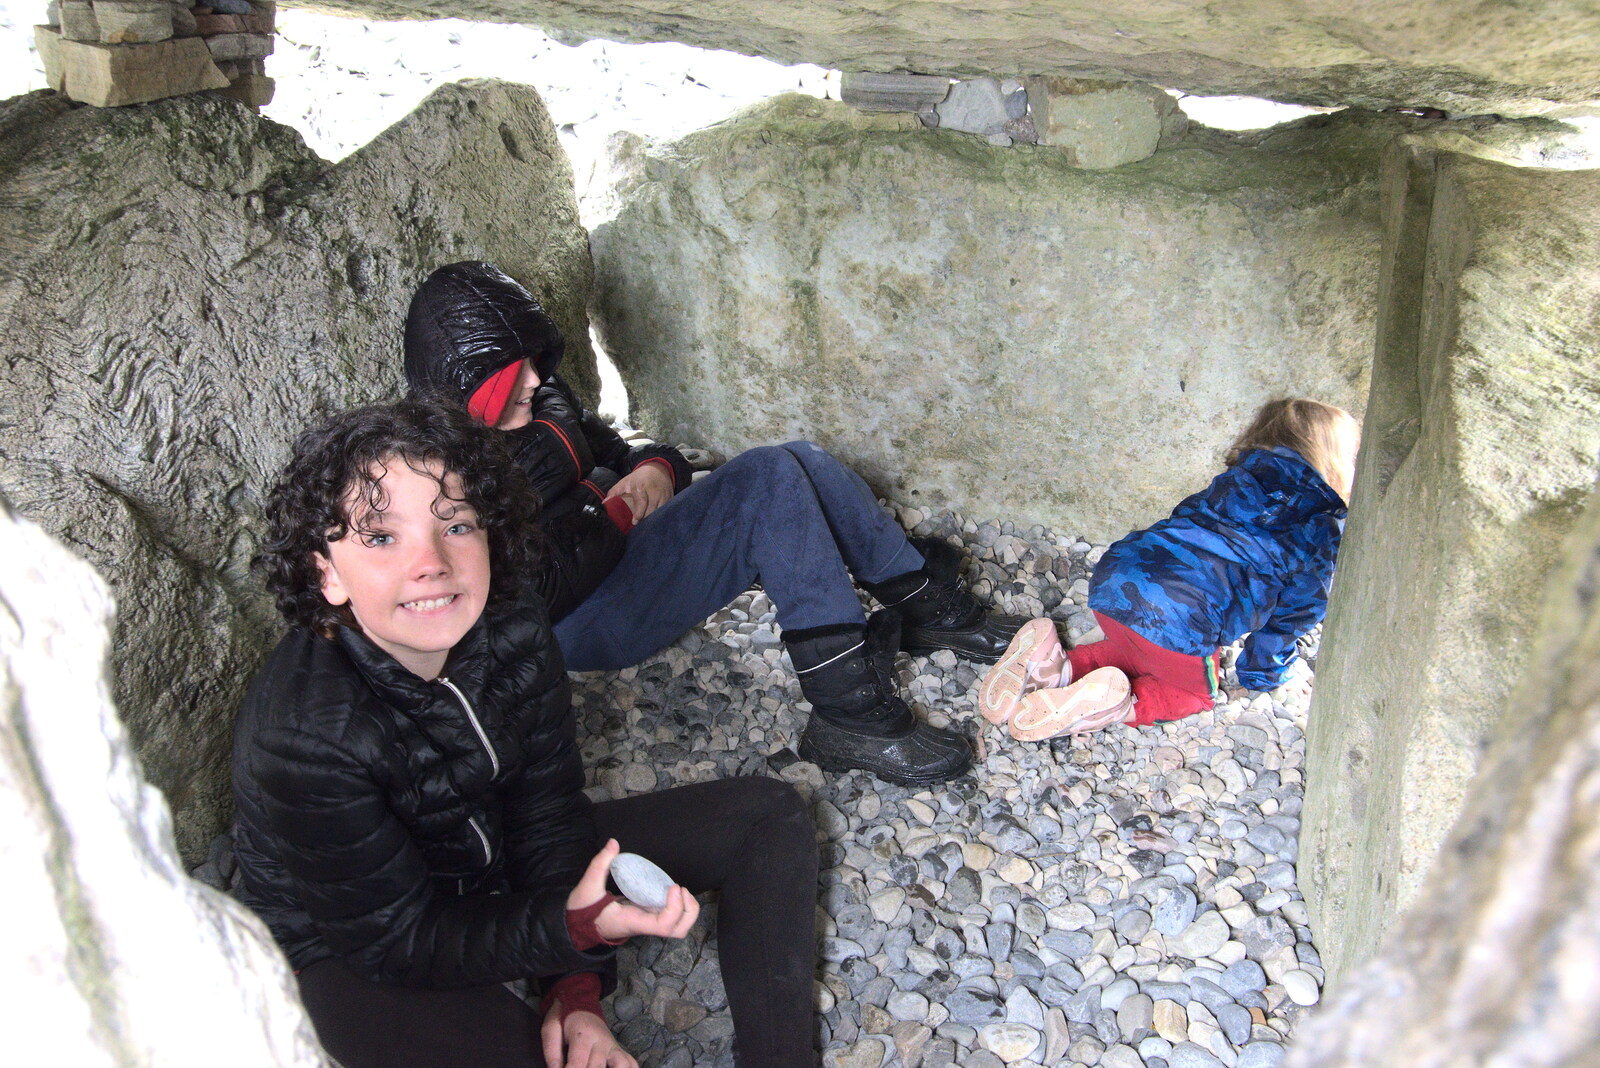 Fern, Fred and Rachel in the passage grave from Walks Around Benbulben and Carrowmore, County Sligo, Ireland - 13th August 2021